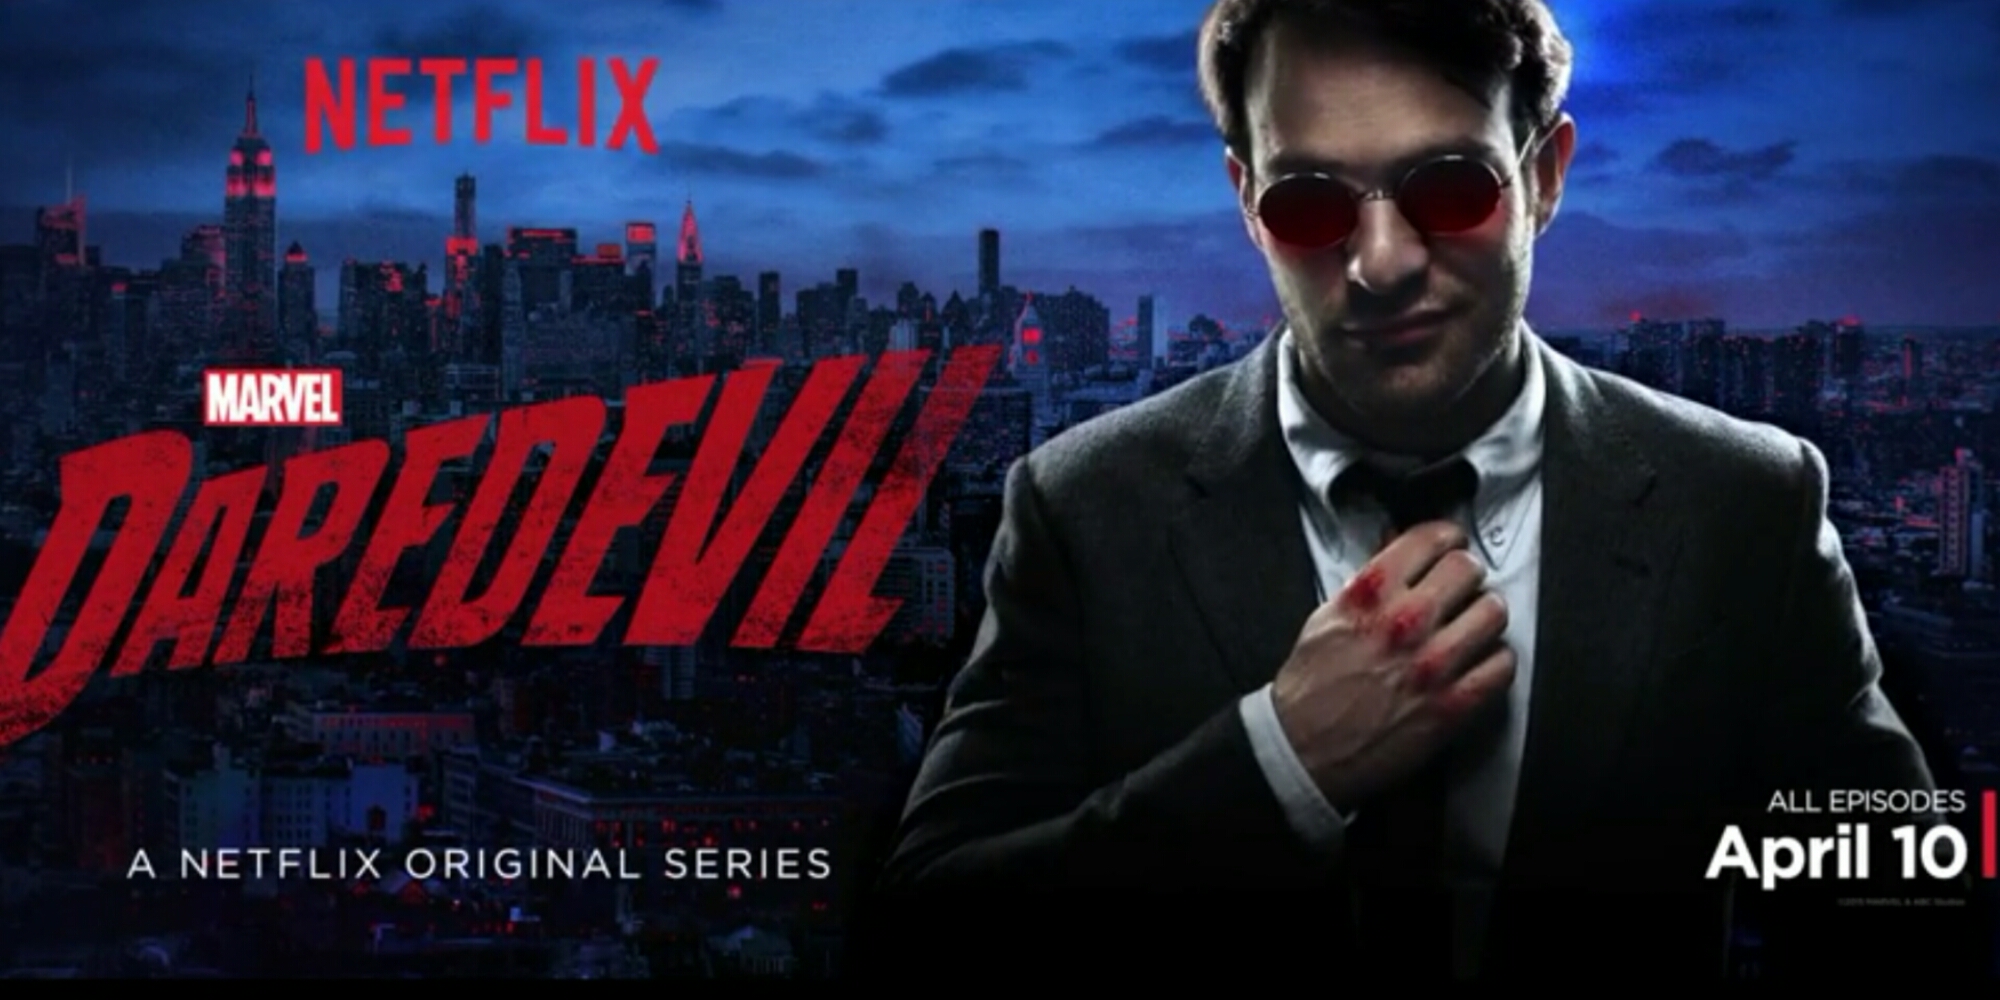 Marvel’s ‘daredevil’ is gritty, hardcore, and awesome